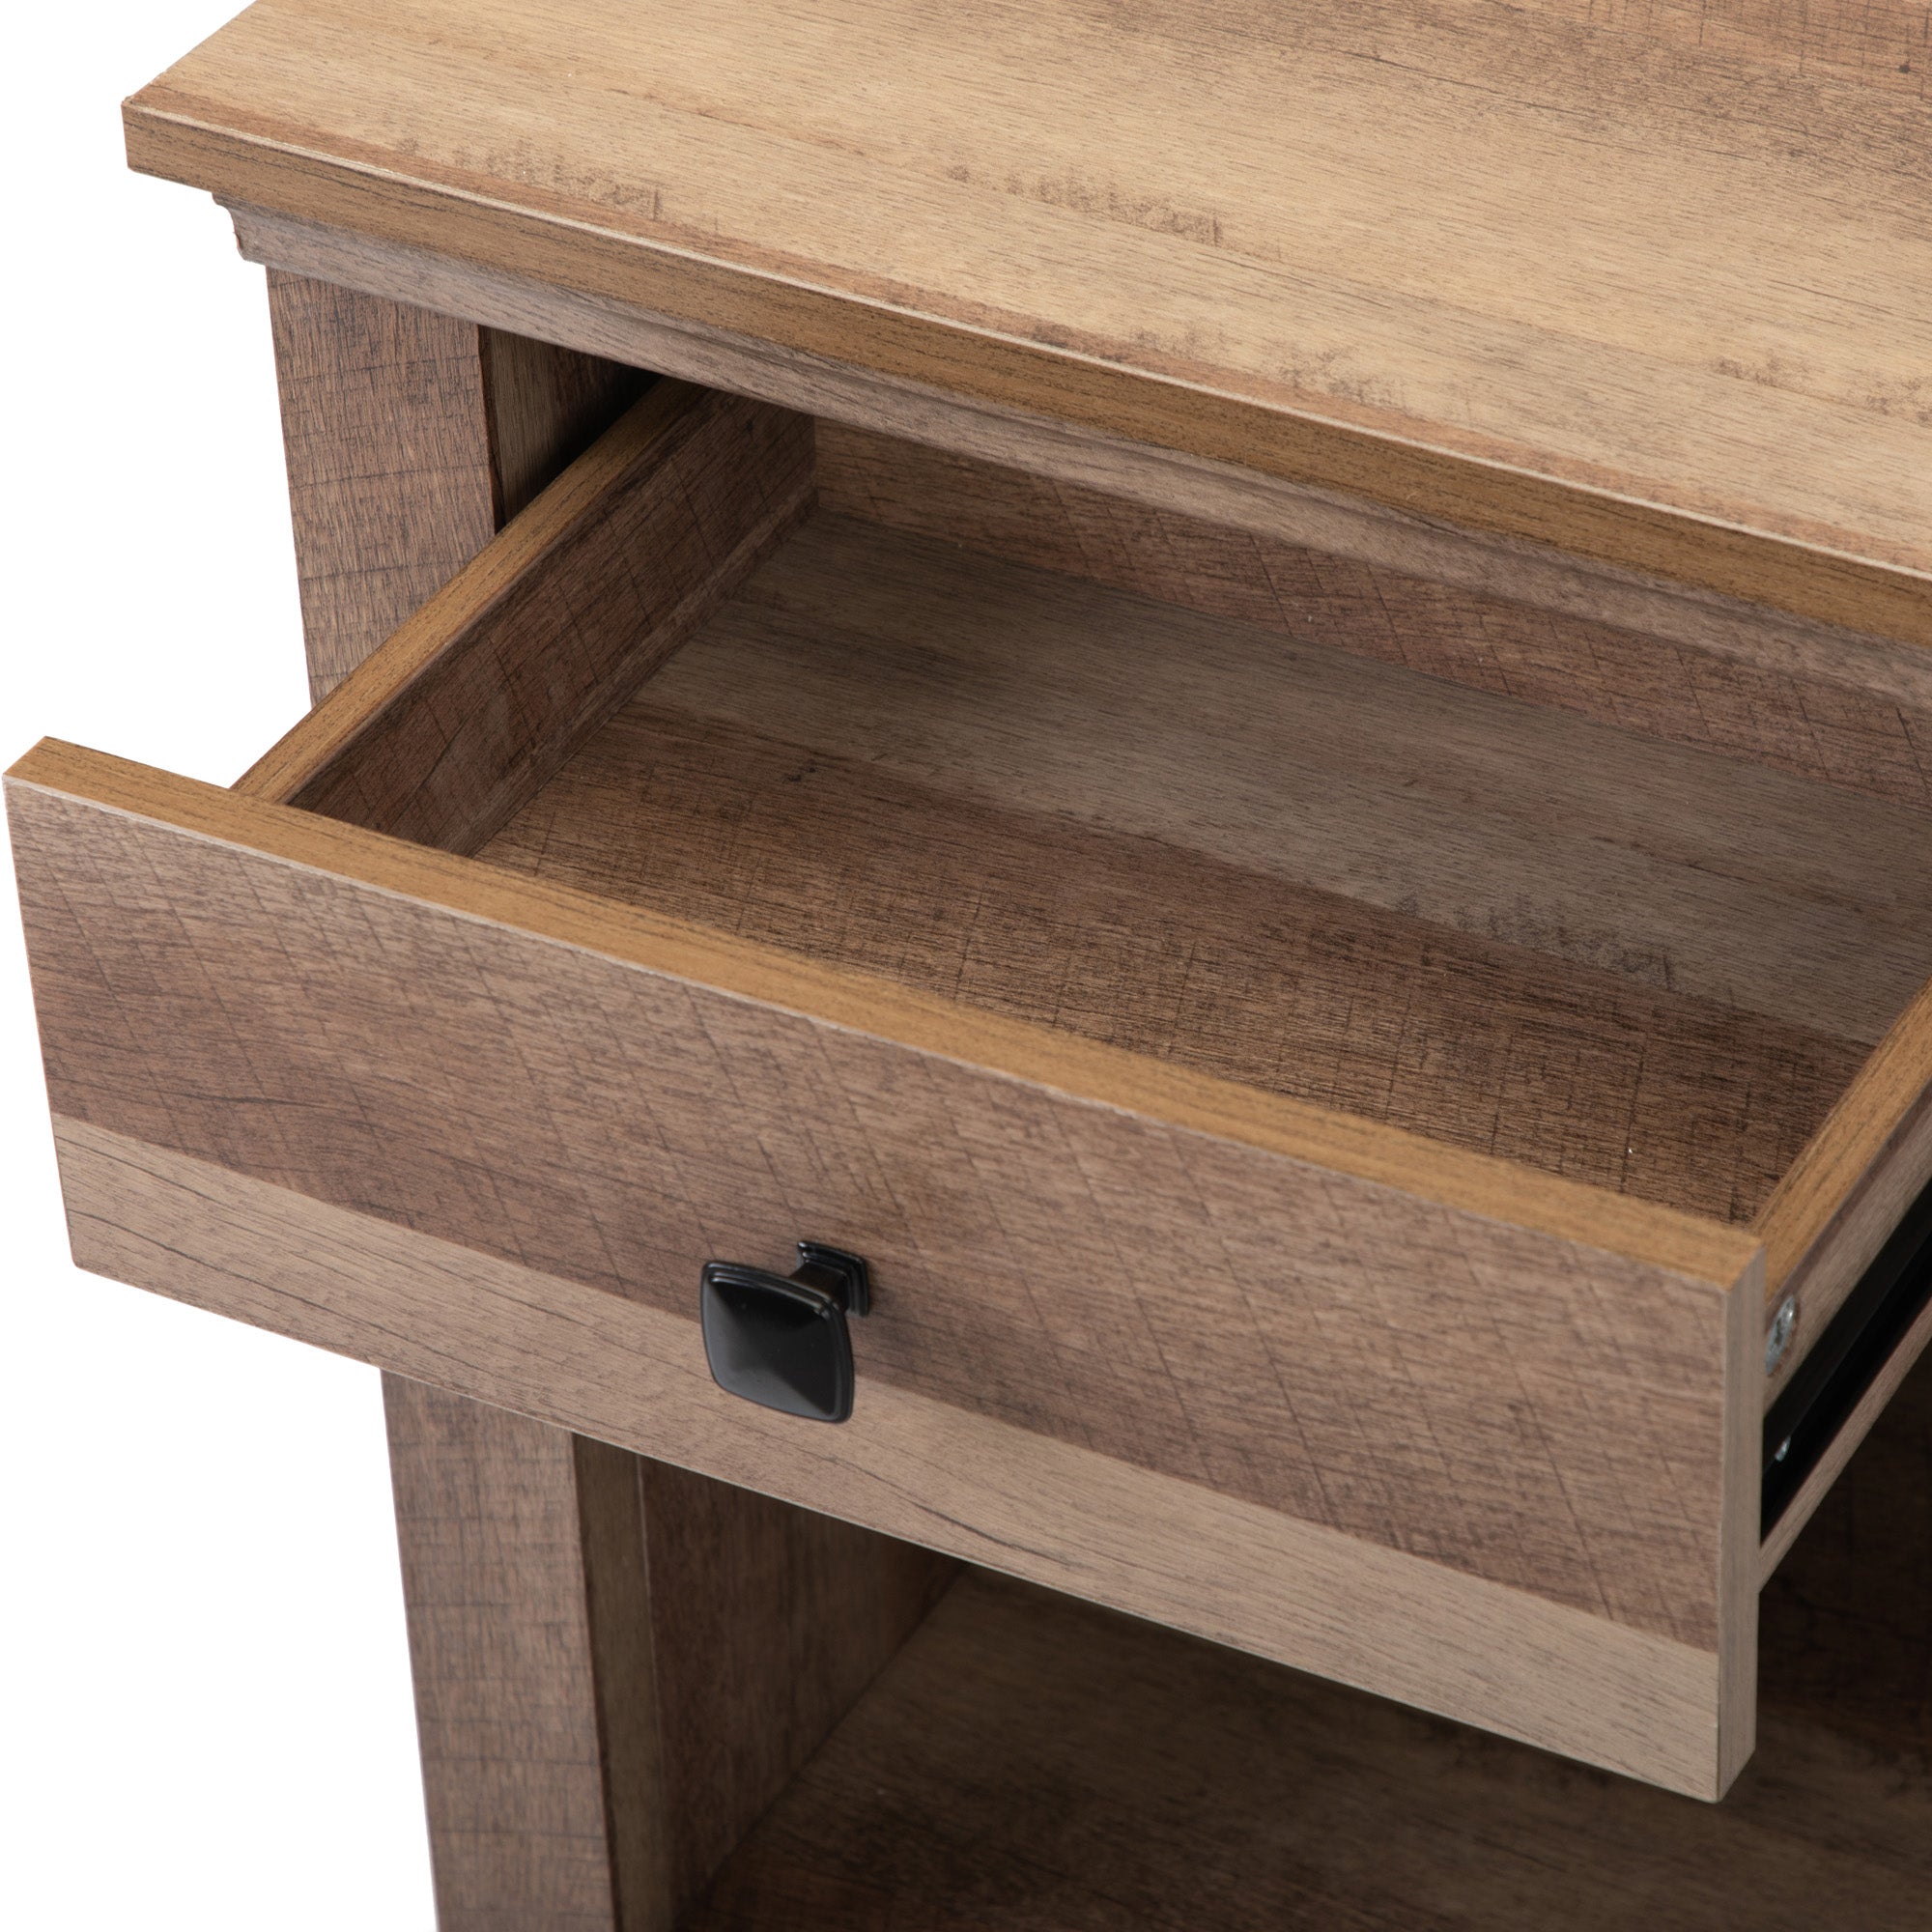 1-Drawer Wood Nightstand with USB Ports and Open Shelf